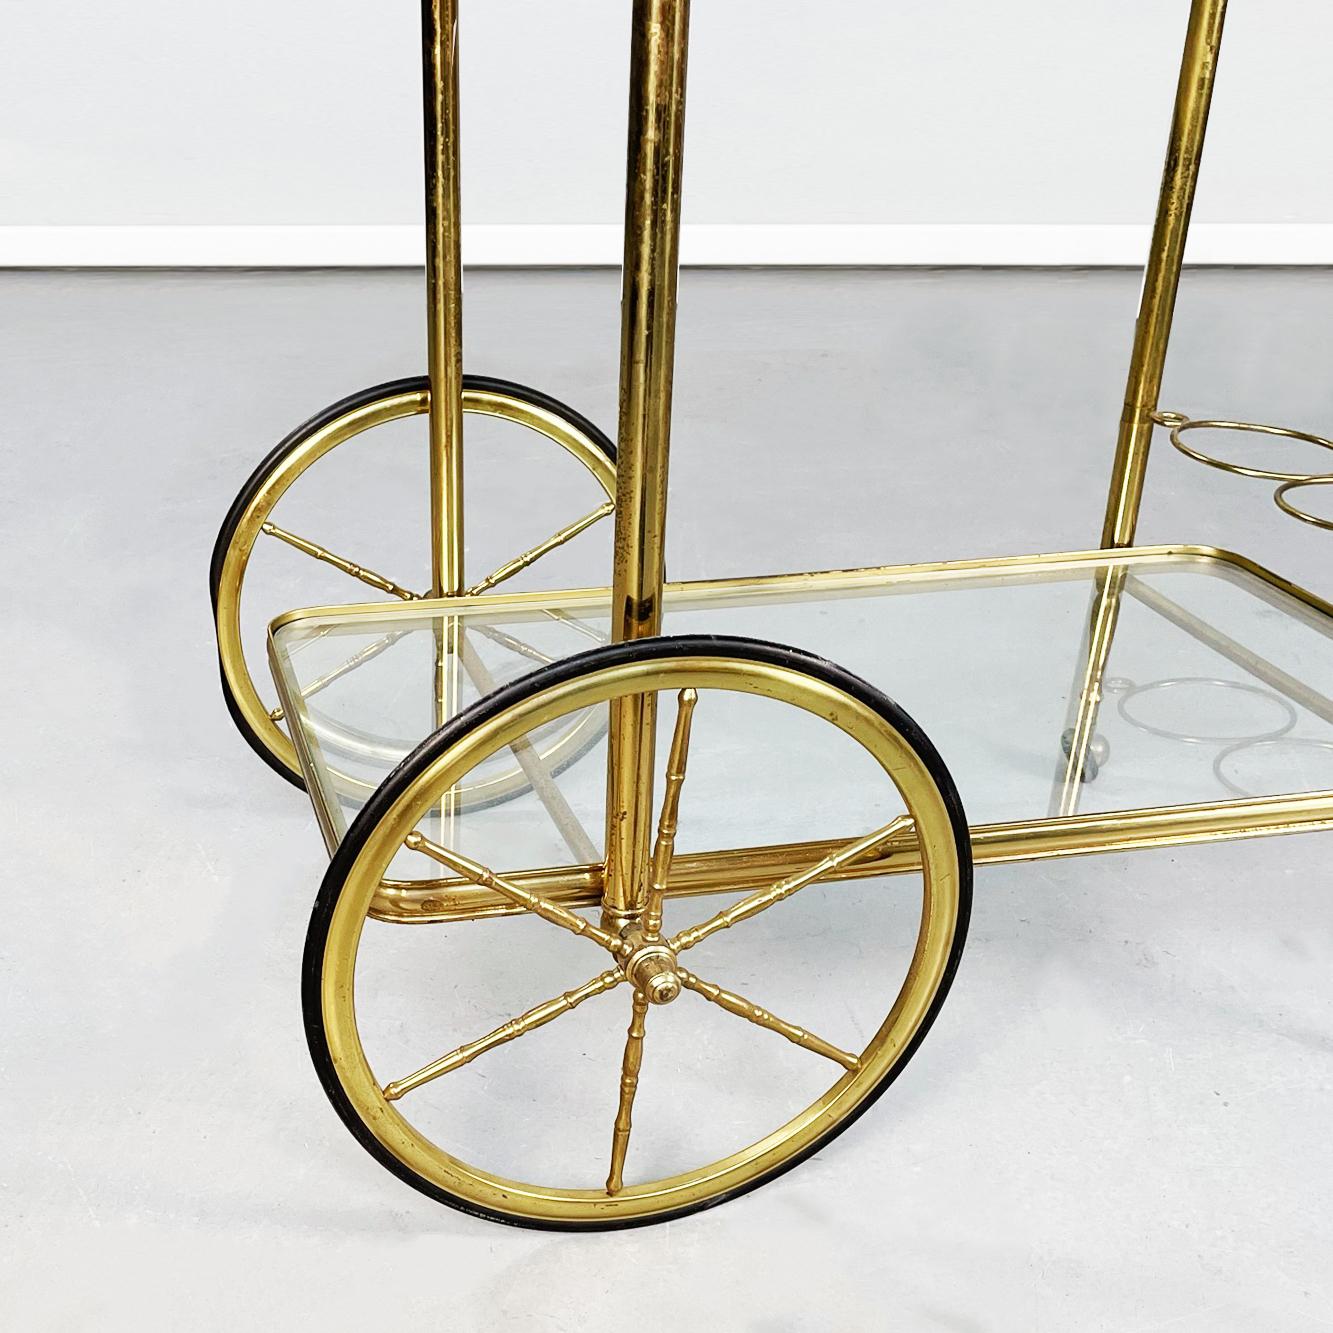 Italian Mid-Century Modern Bar Cart in Brass and Glass, 1950s For Sale 10